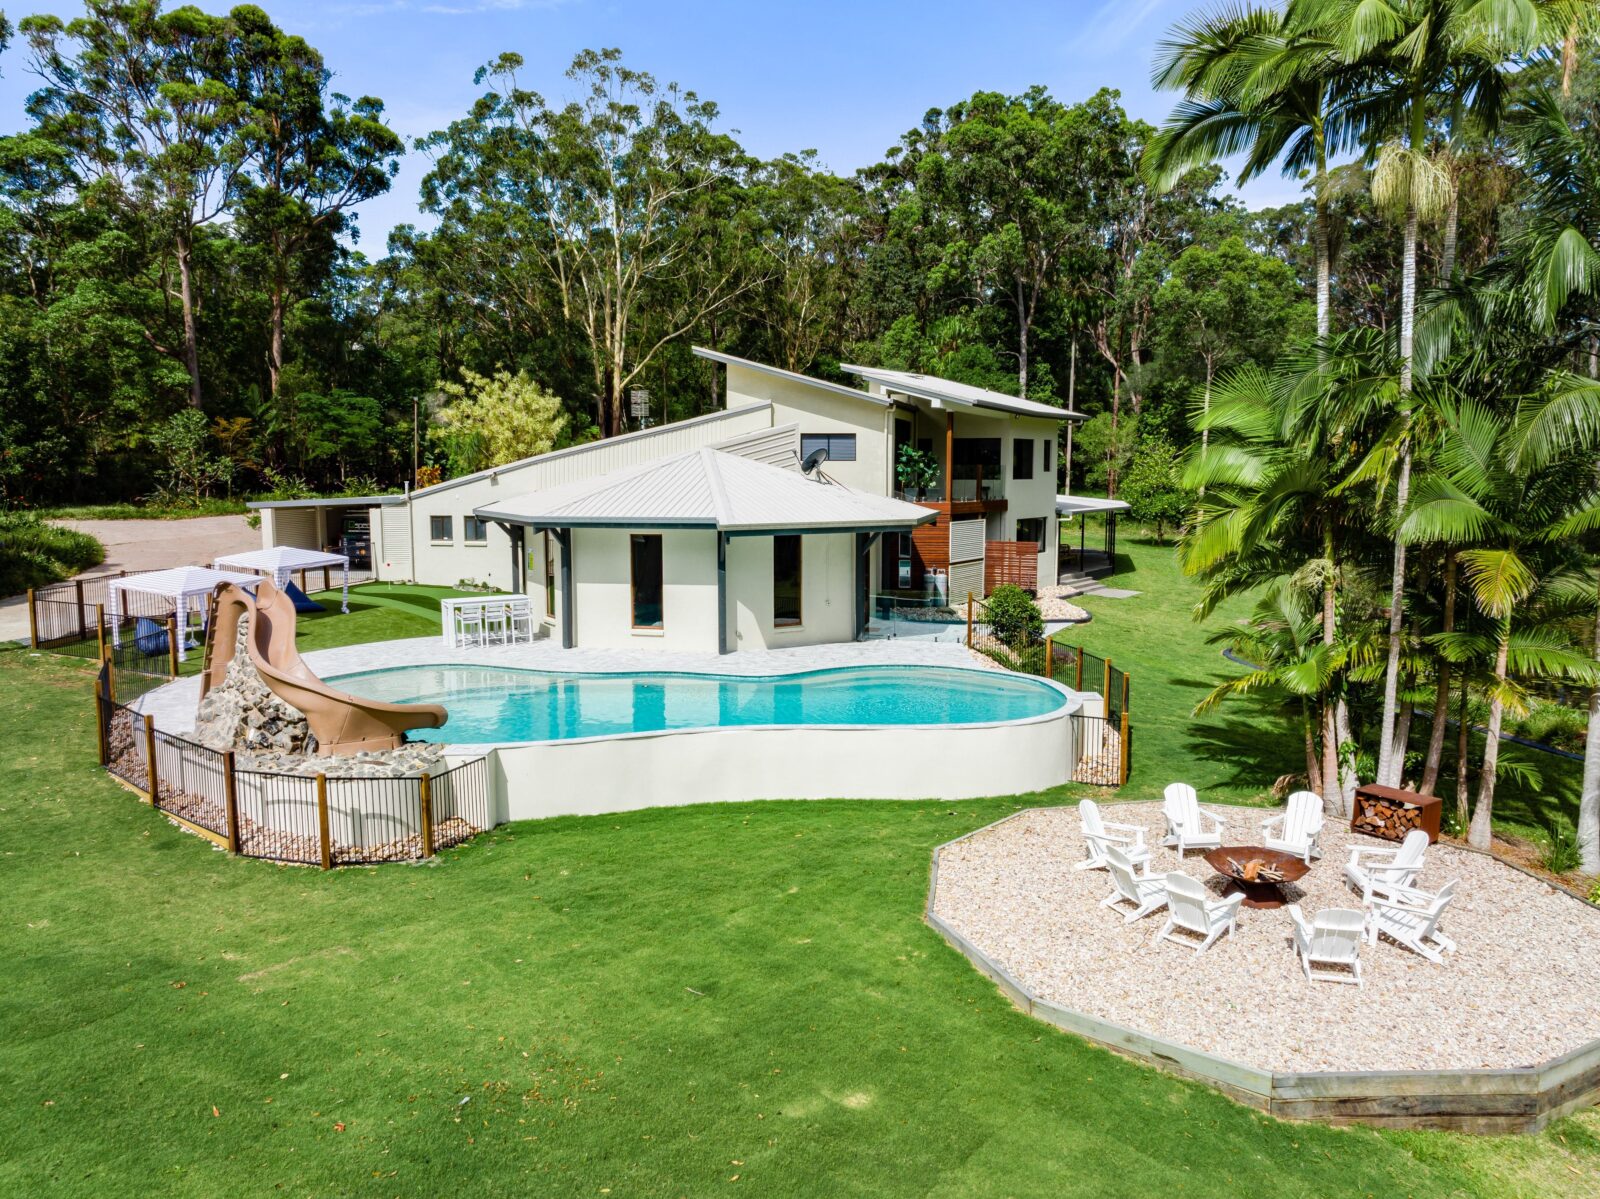 Noosa Hinterland accomodation, large group bookings with a pool and fire pit, close to Noosa Heads